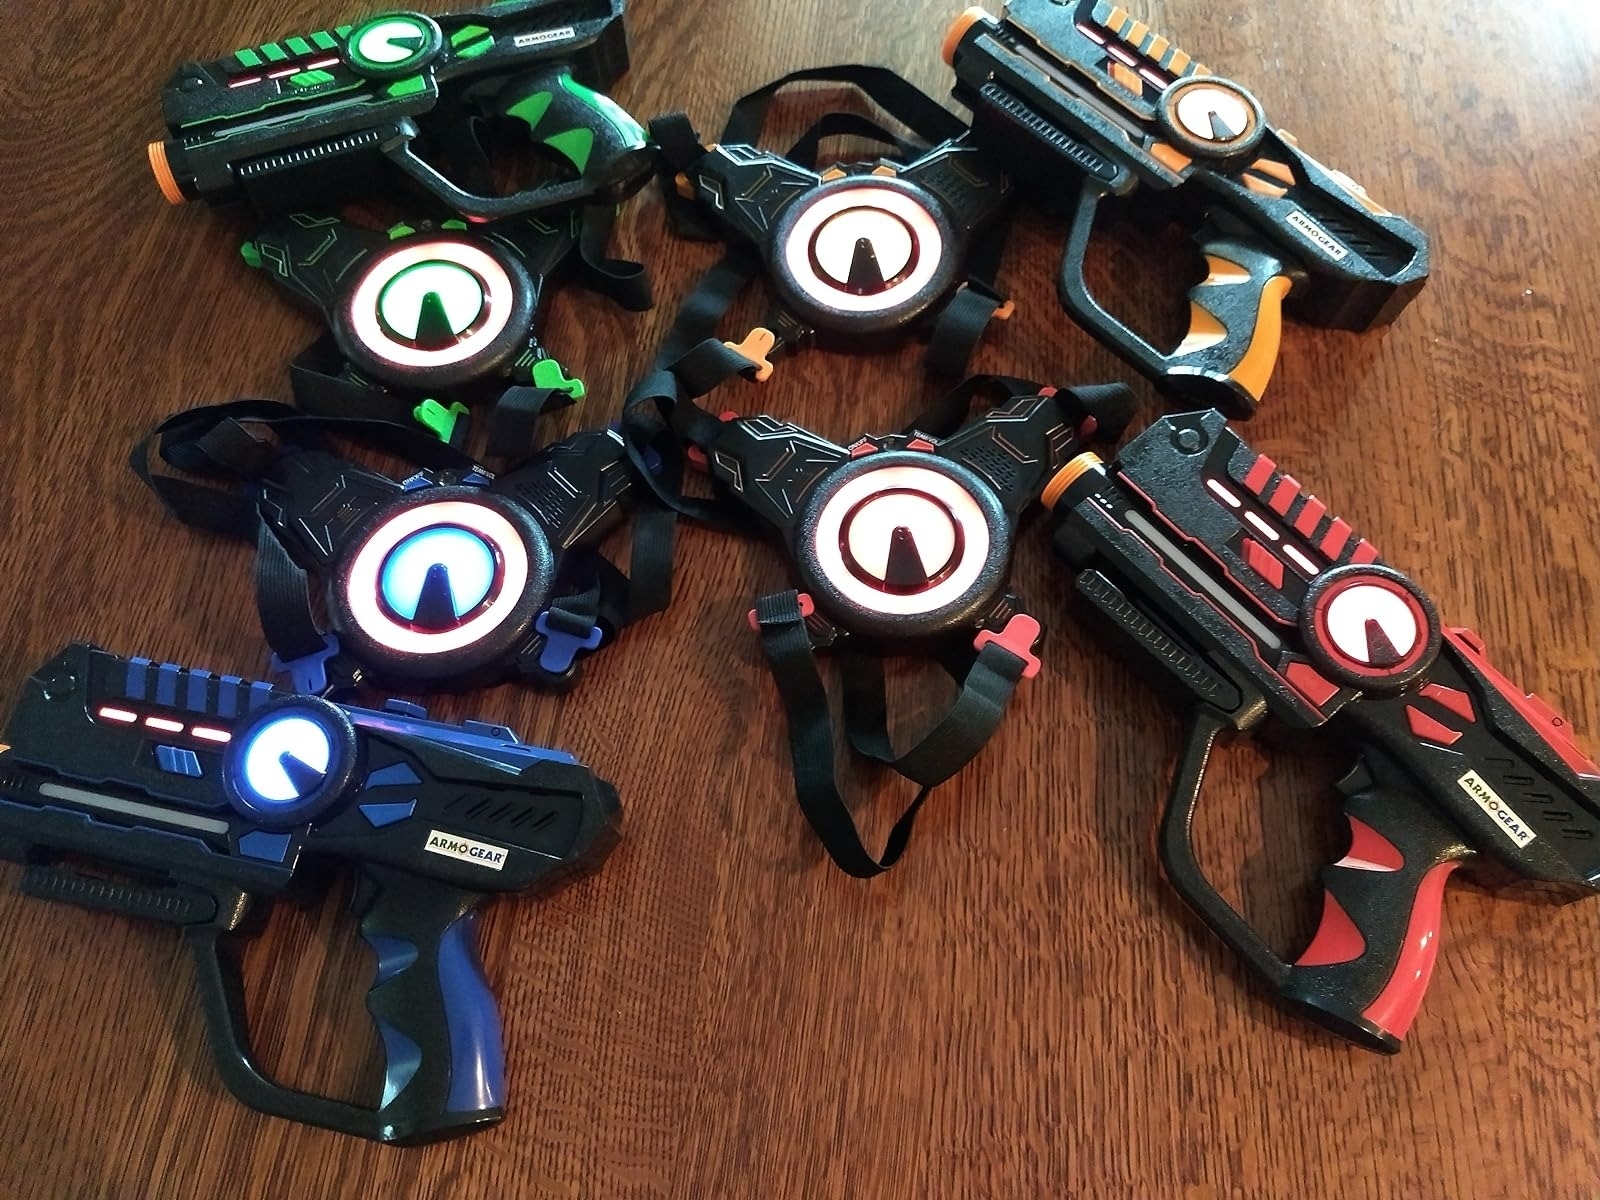 A photo of six toy laser guns in different designs and colors arranged on a table, displayed as part of a shopping article